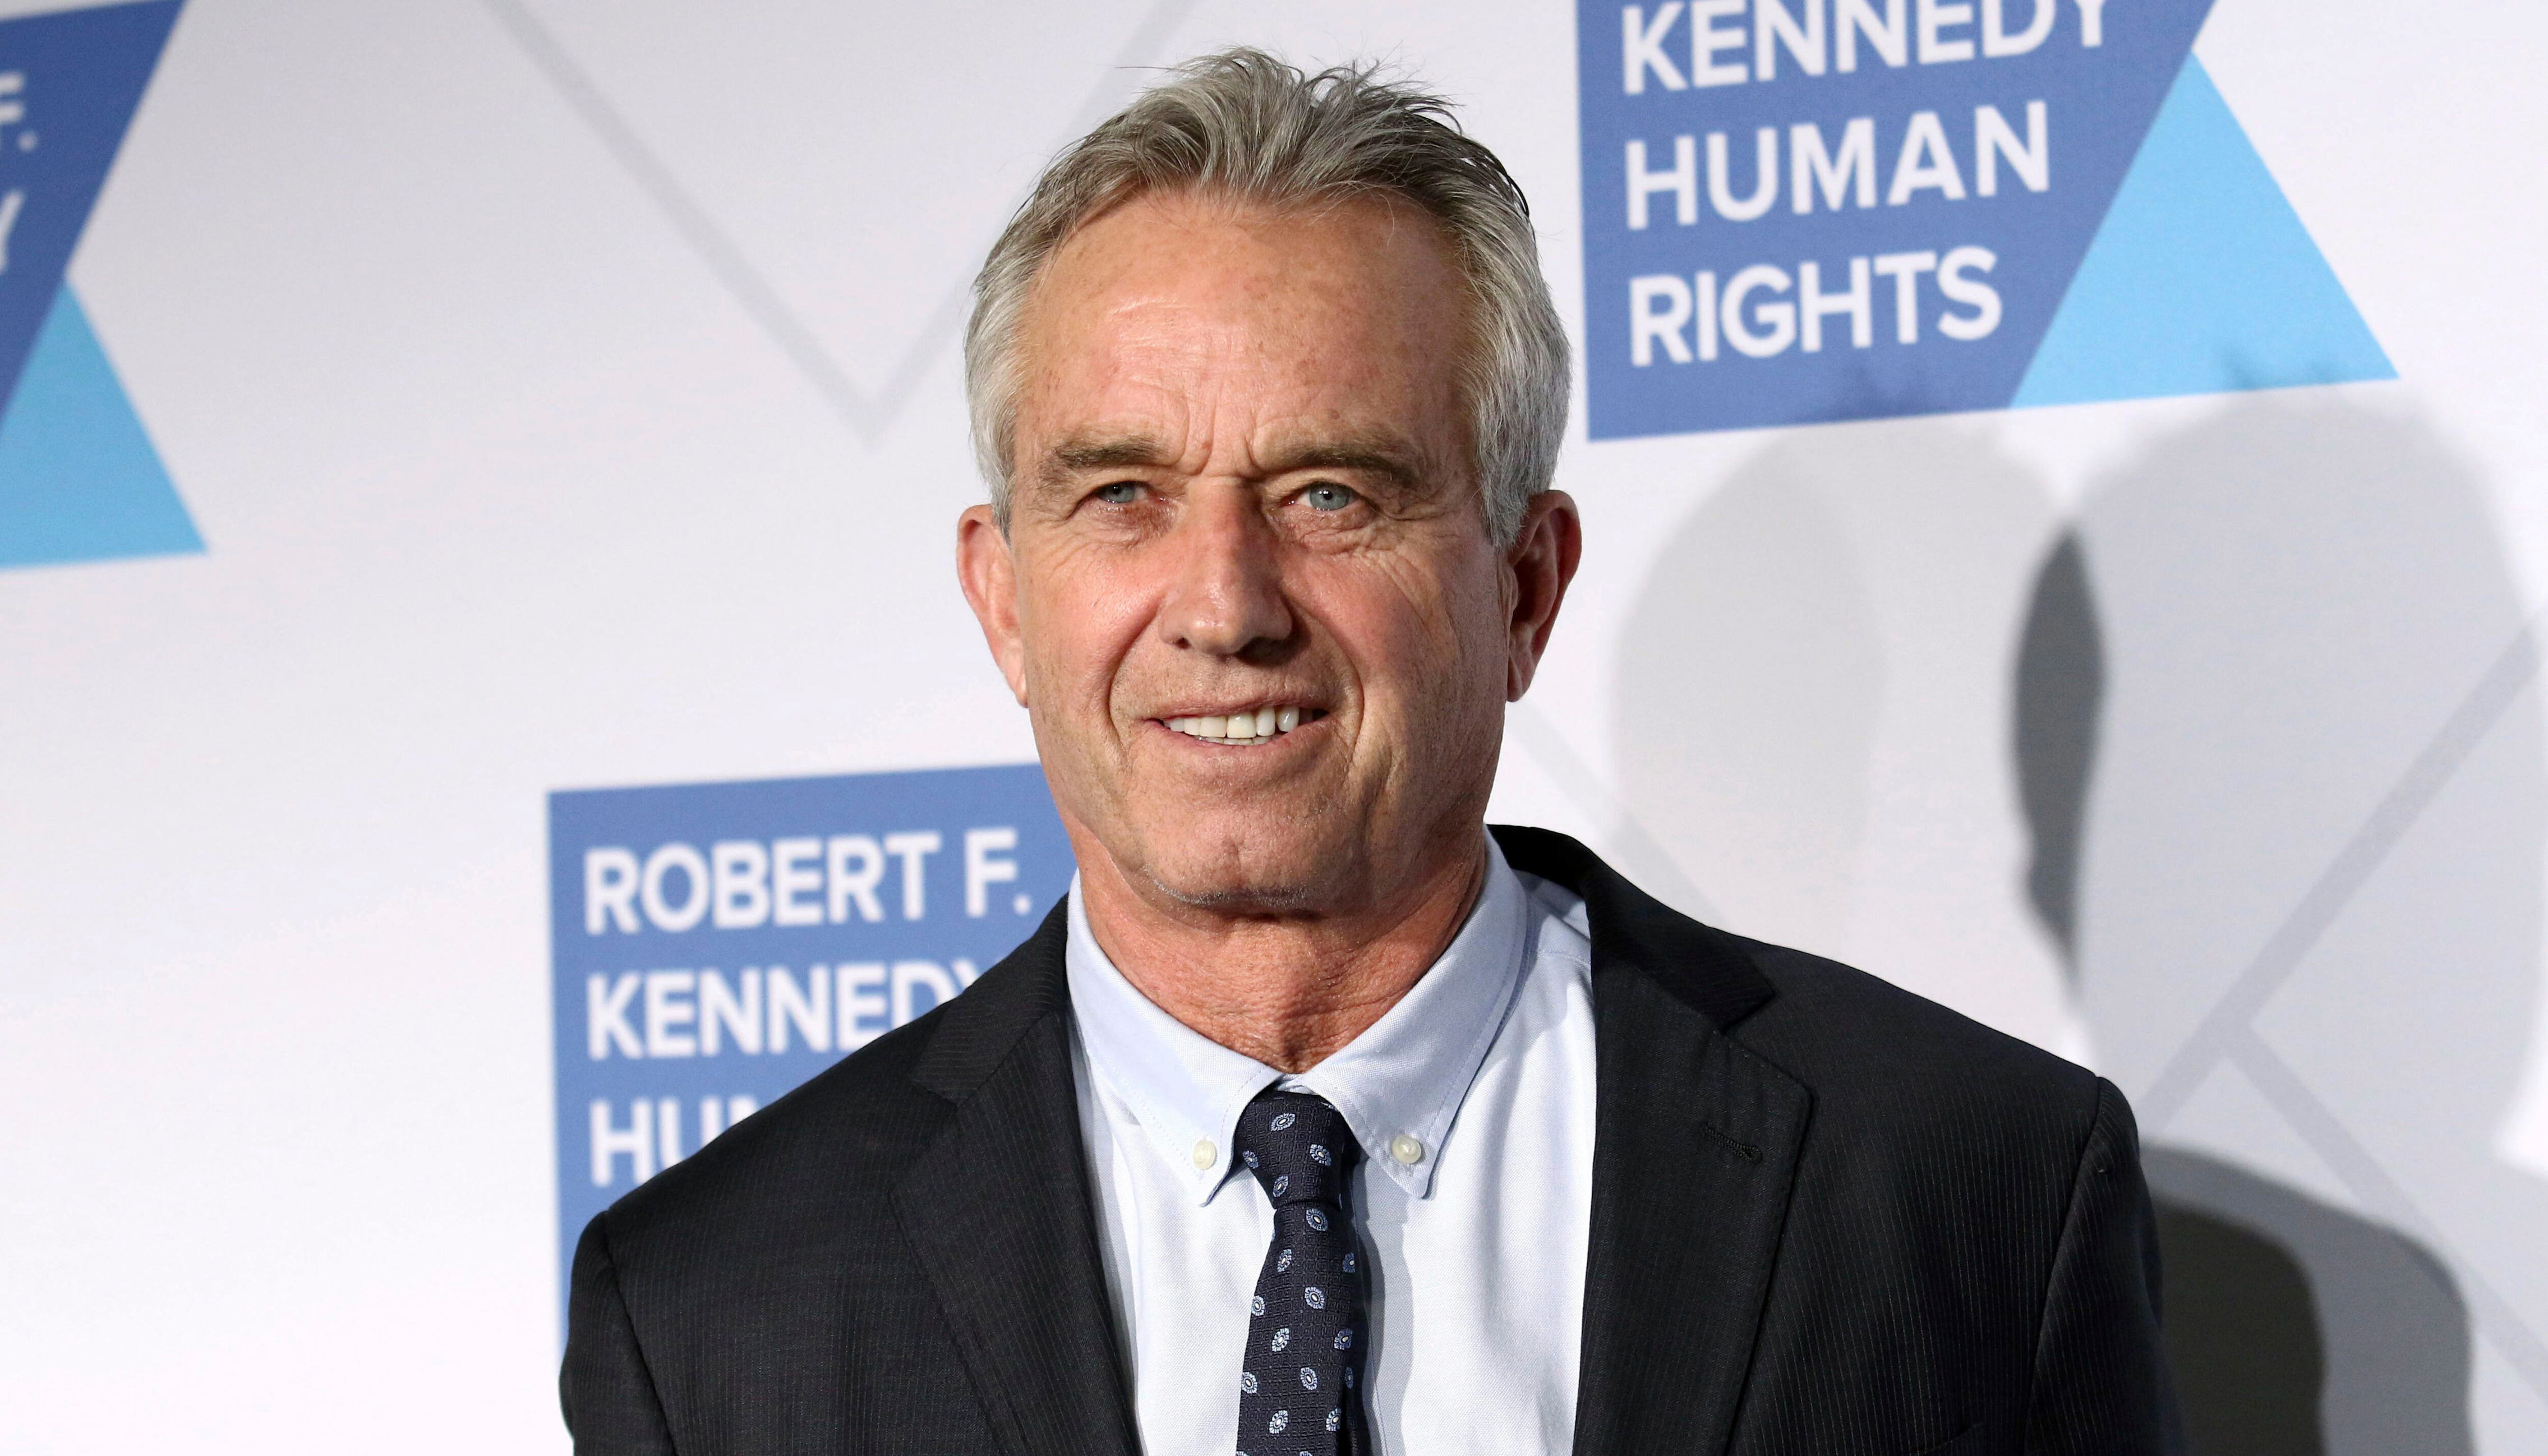 Presidential candidate Robert F. Kennedy, Jr. to hold rally in Kansas City